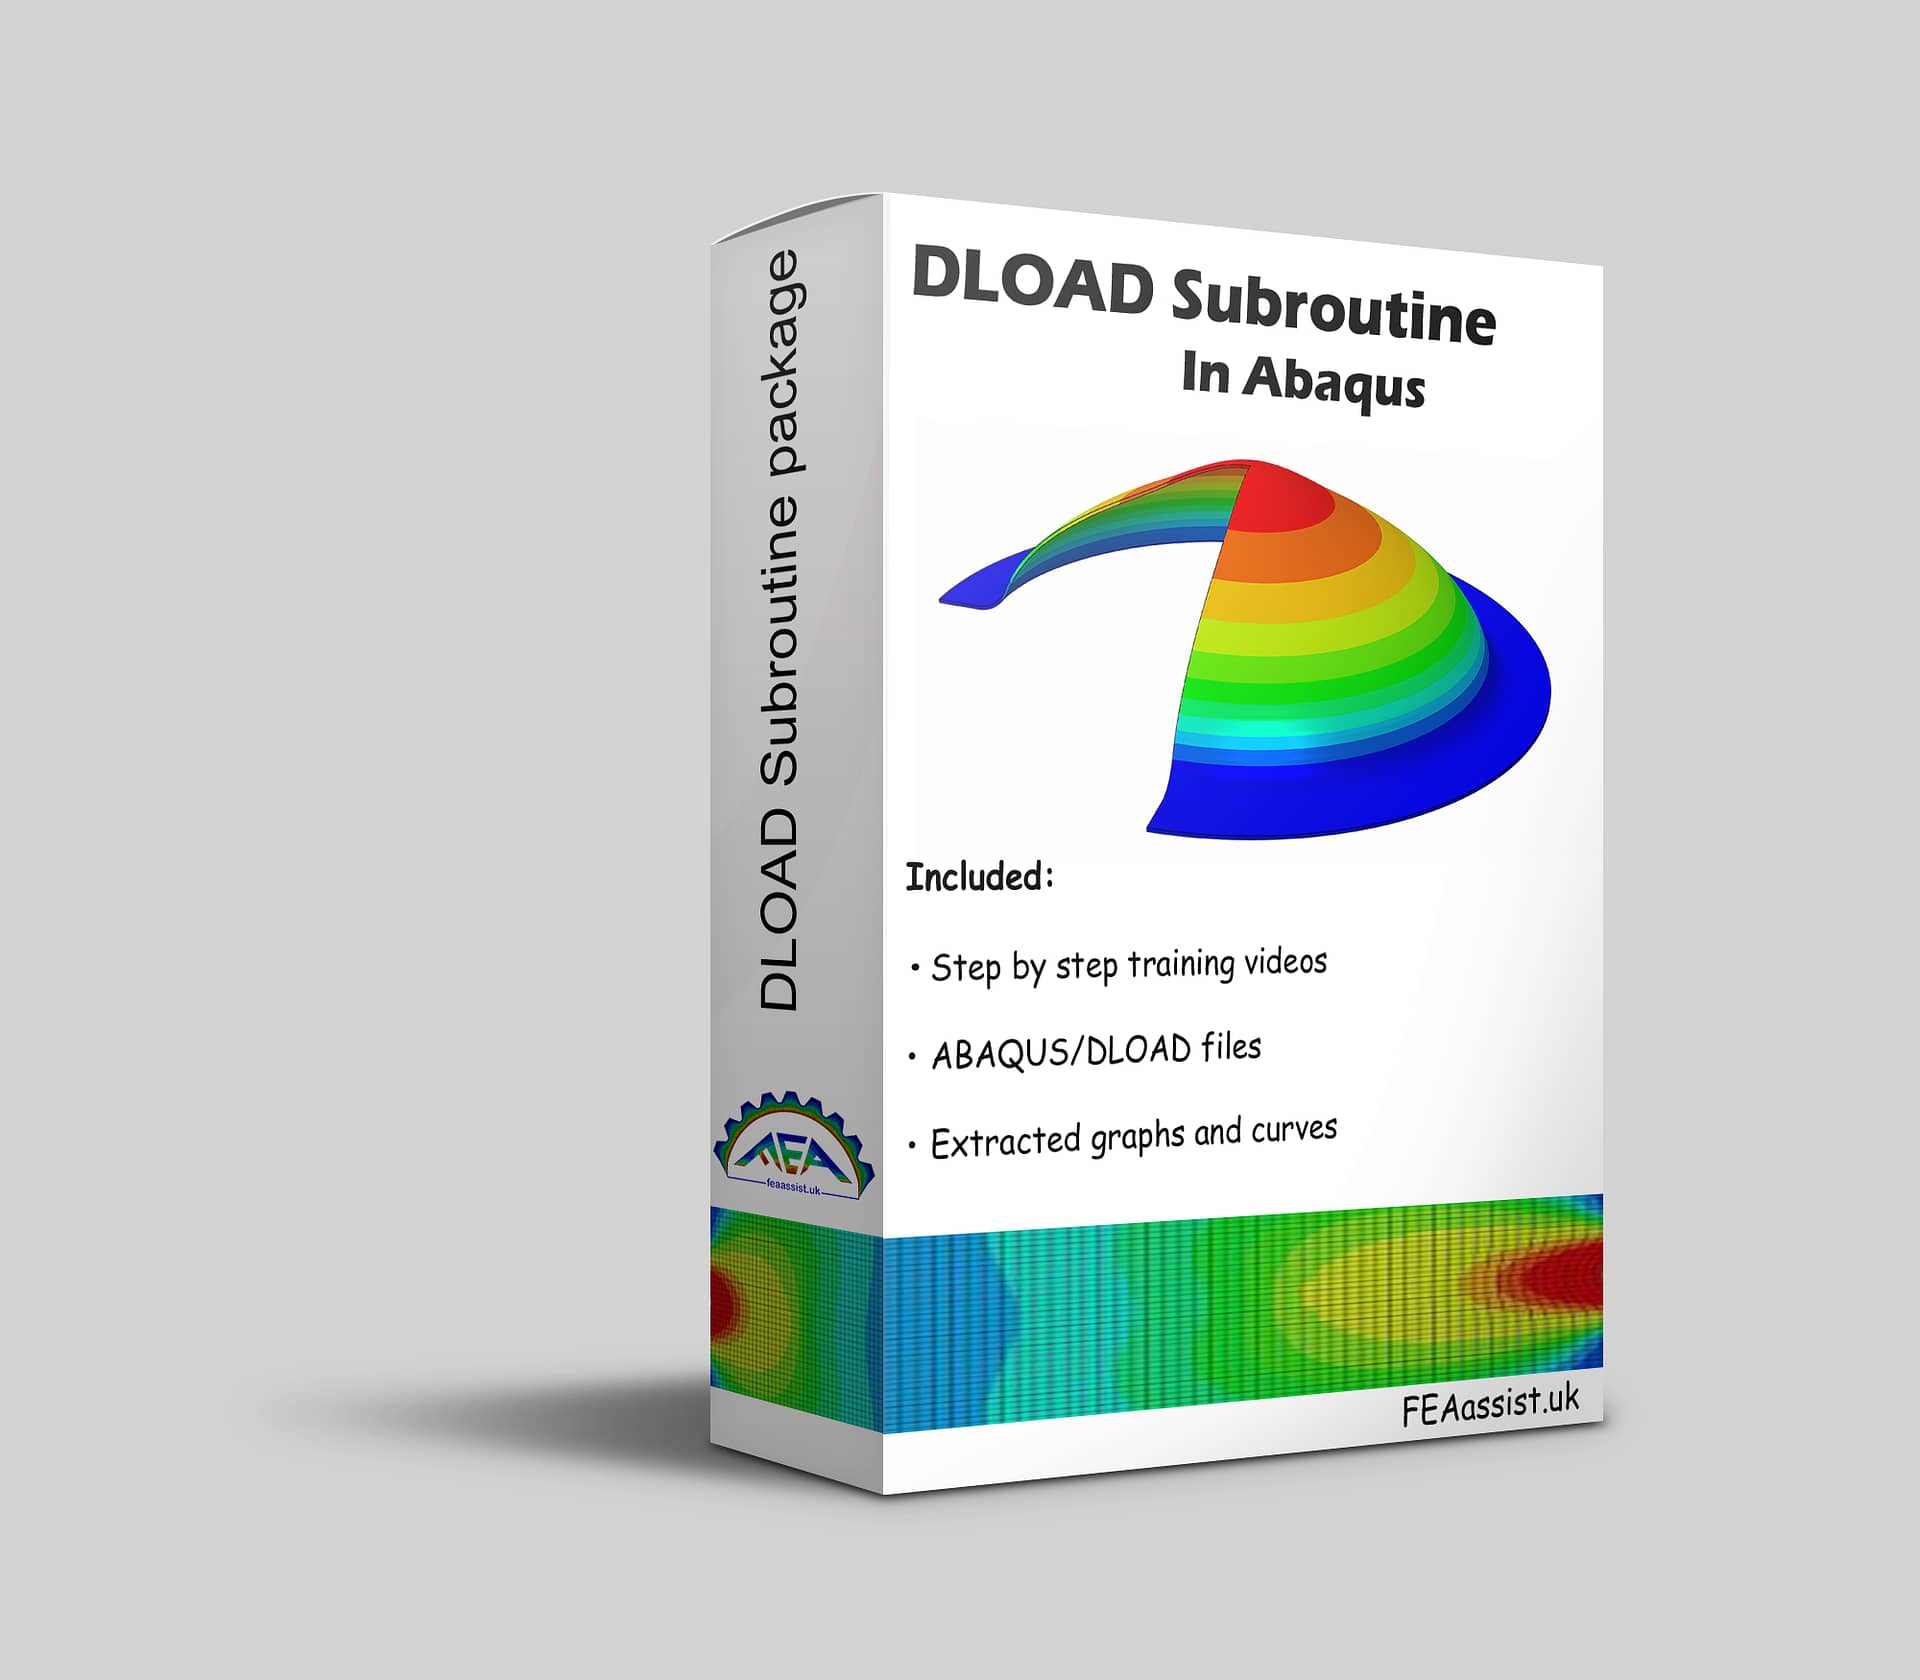 DLOAD subroutine package